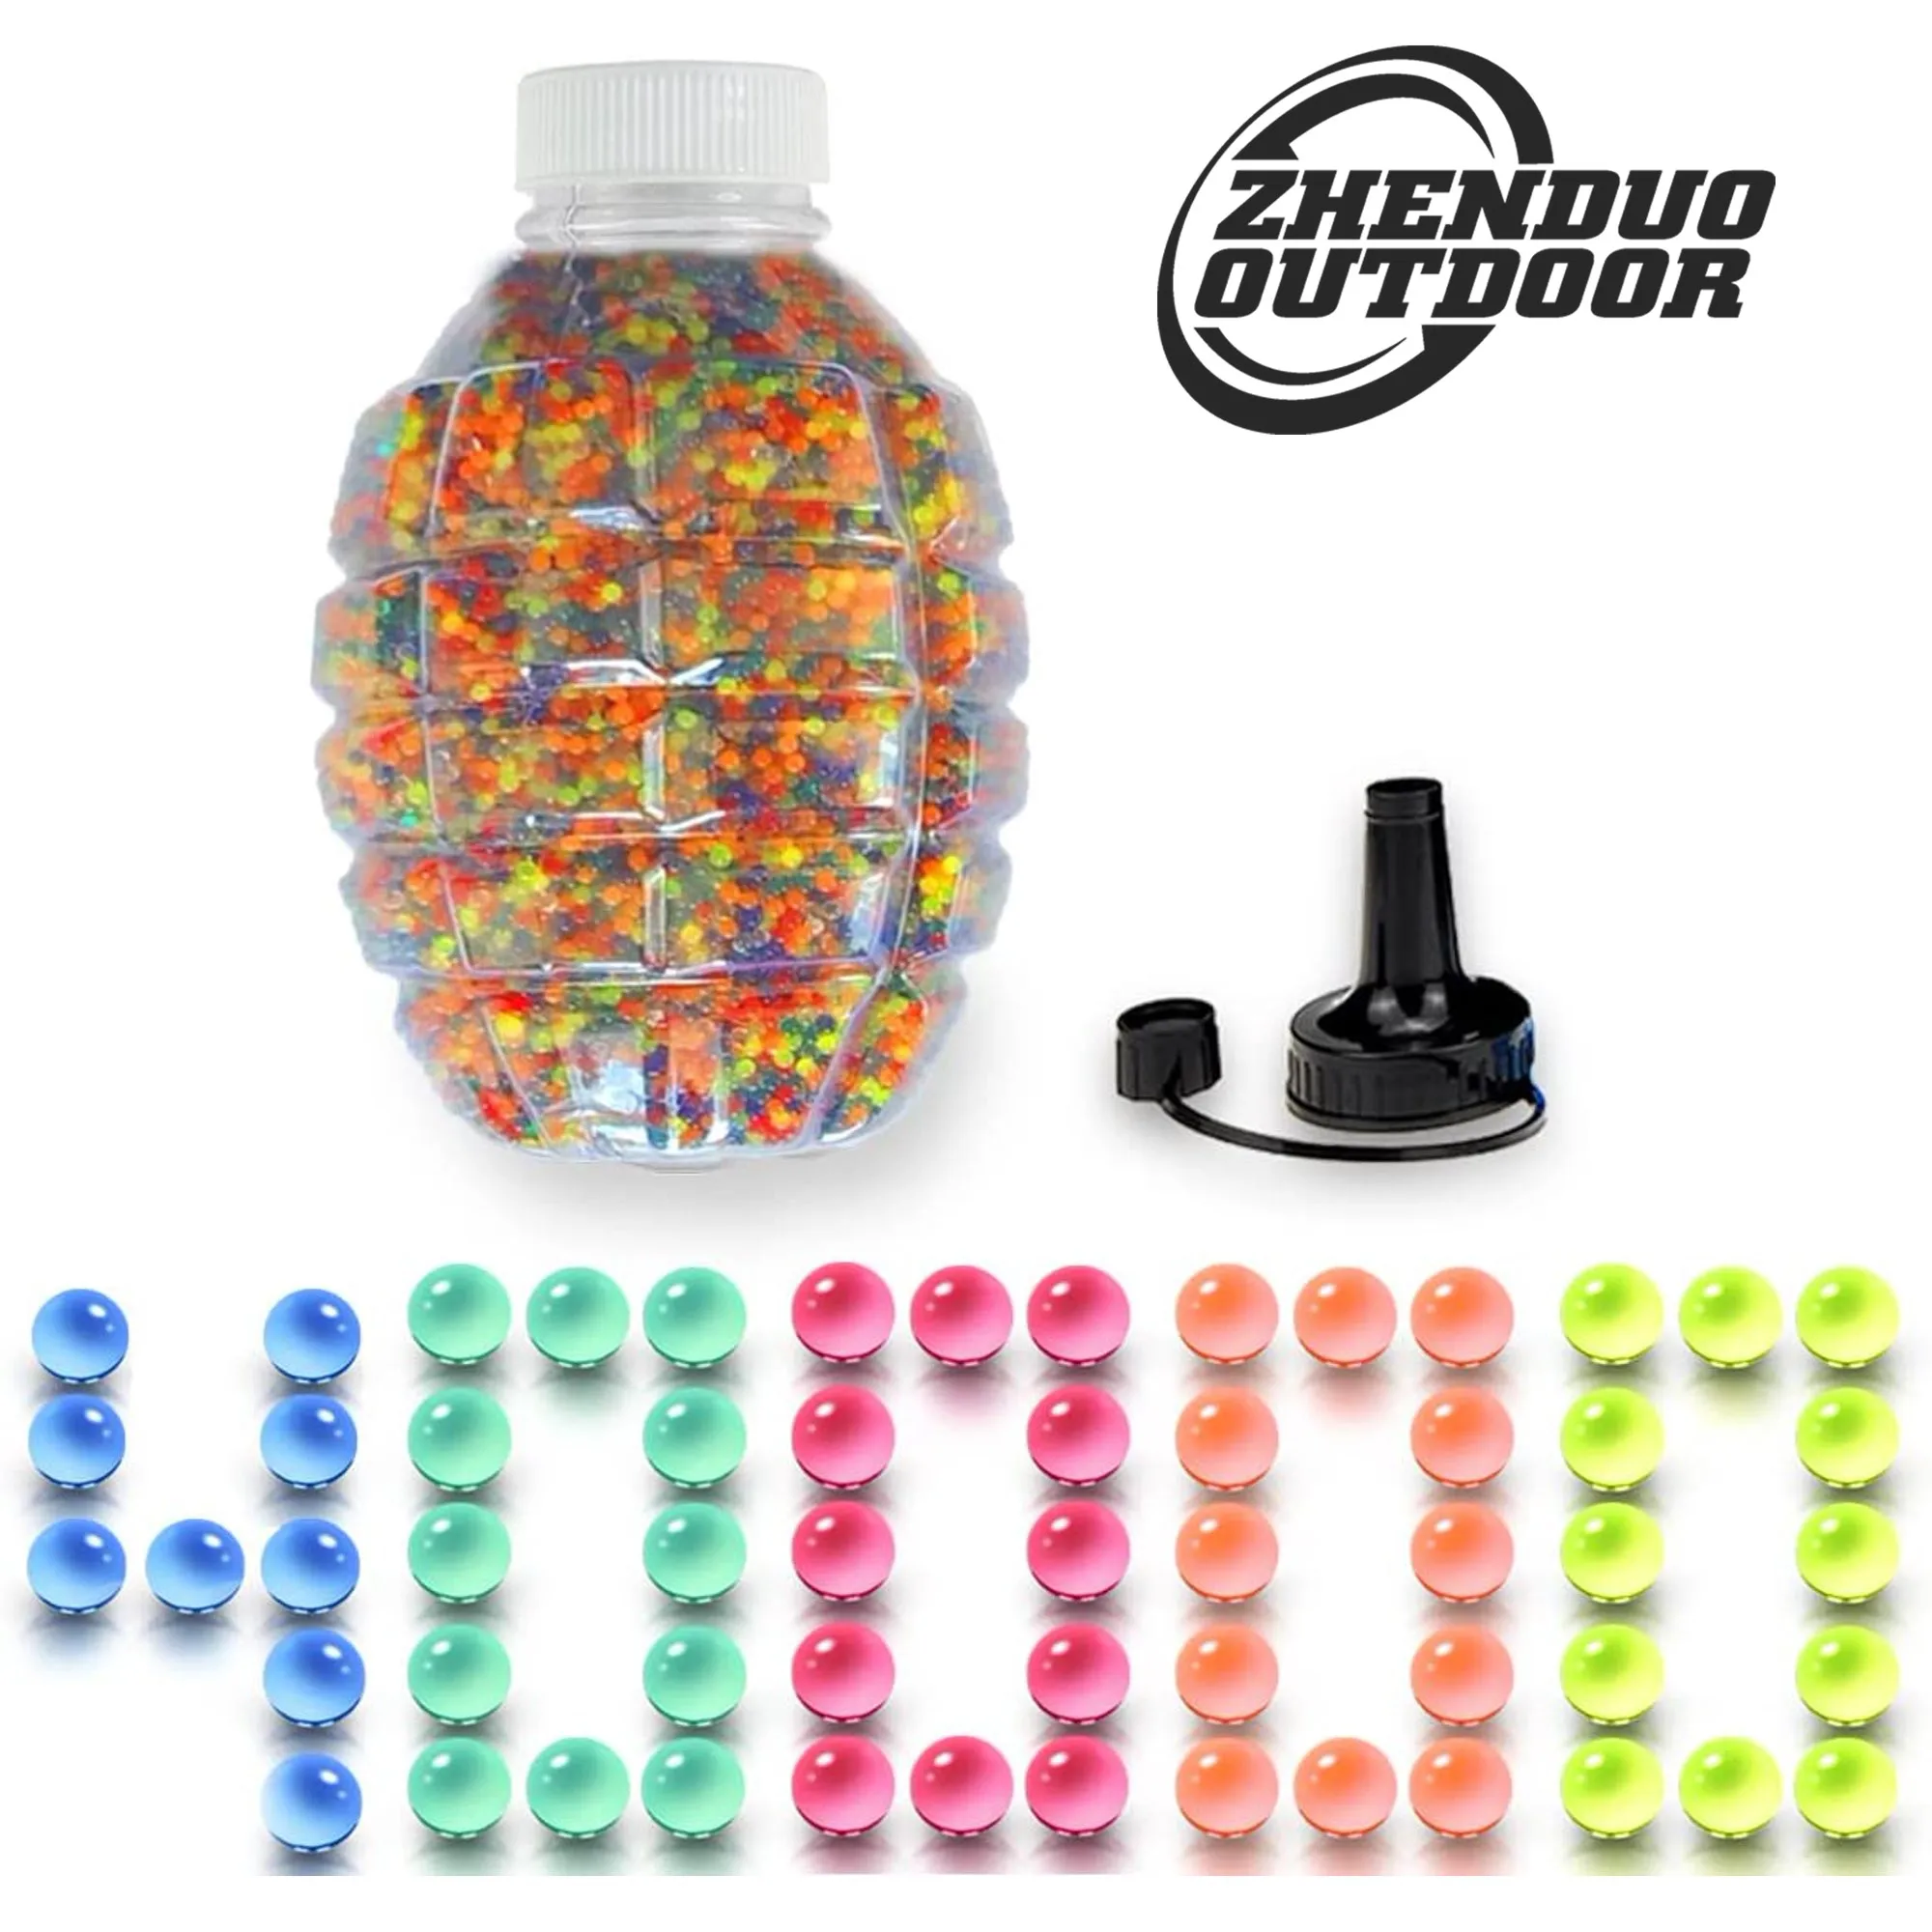 

ZHENDUO OUTDOOR 40,000pcs Water Beads 7-8mm with Pineapple Bottle and Funnel Tip for Gel Ball Blaster Replace Magazine